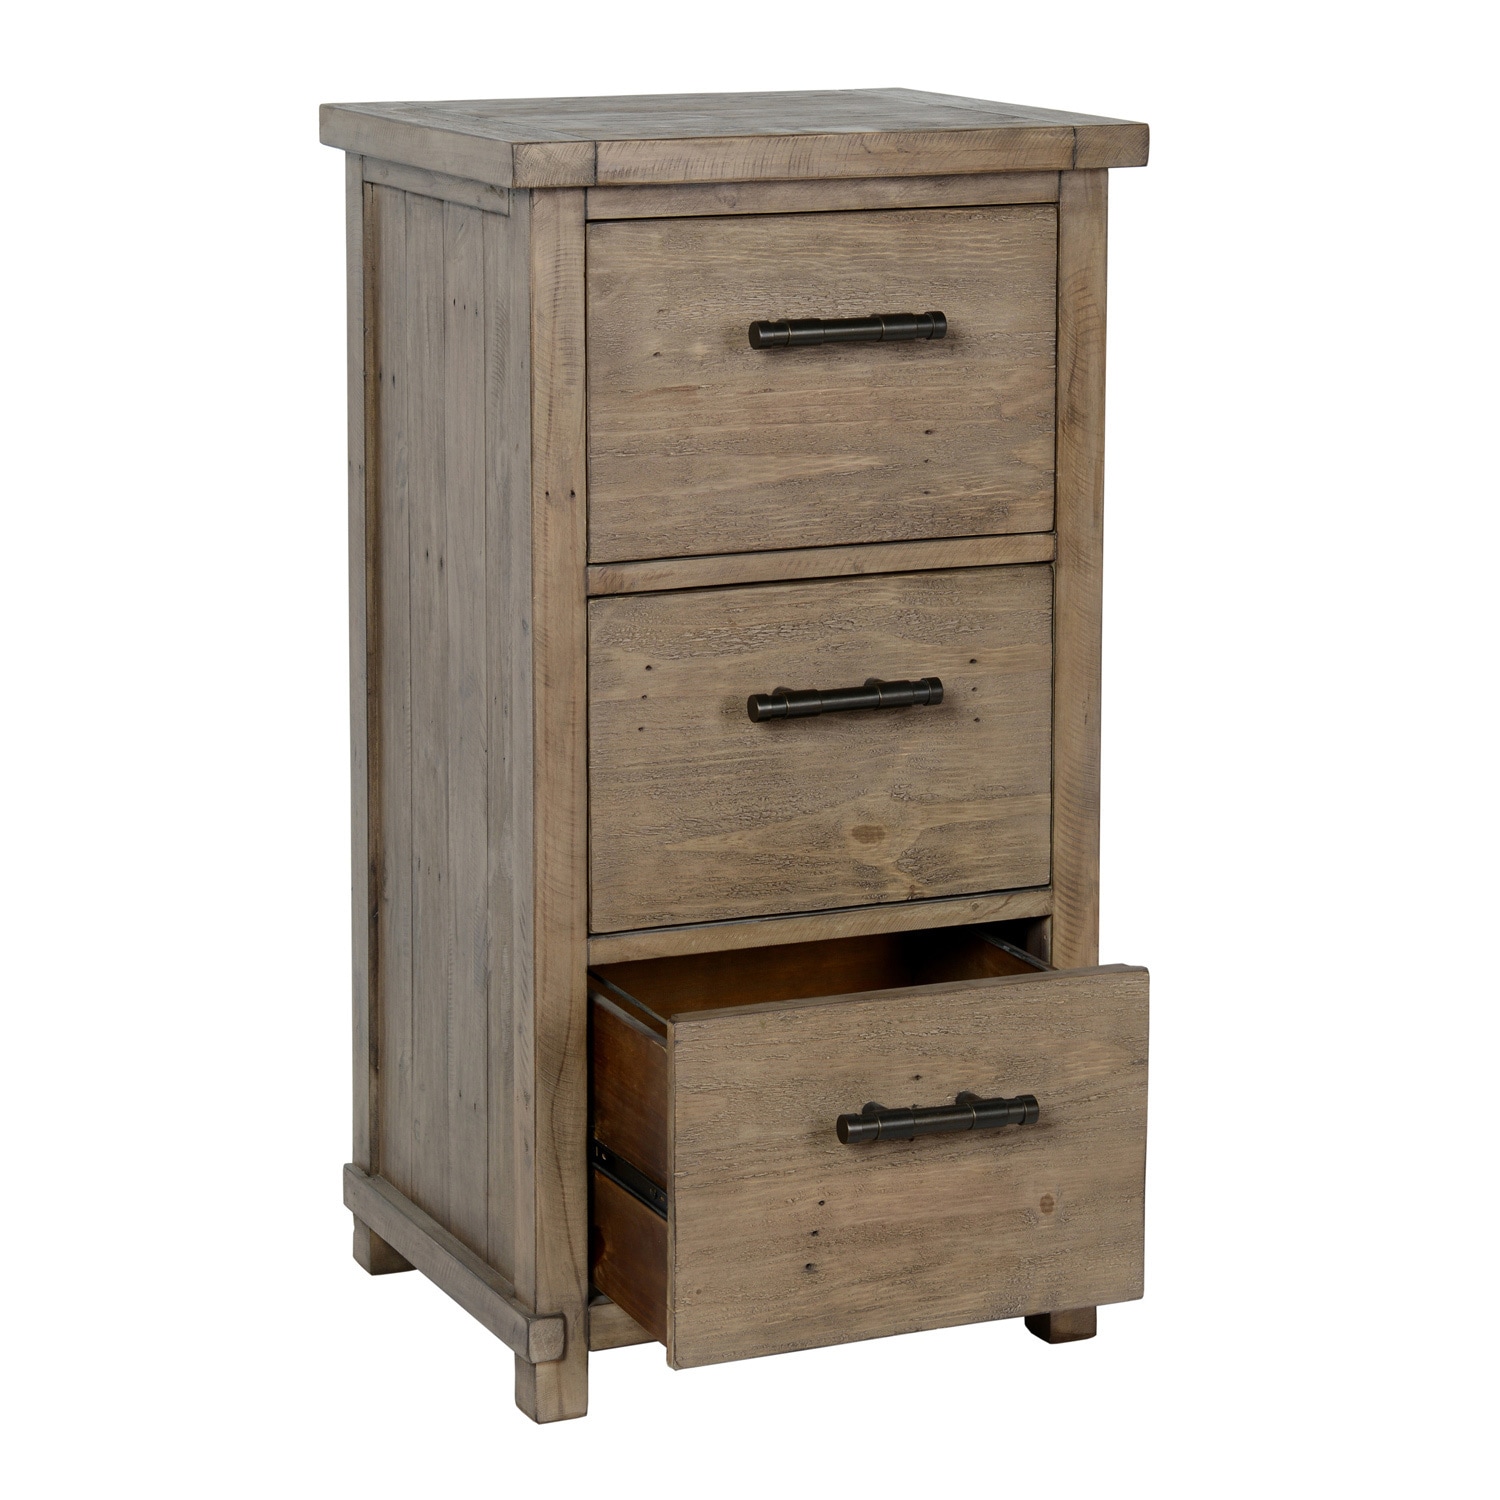 Shop Kasey Reclaimed Pine 3 Drawer Filing Cabinet By Kosas Home